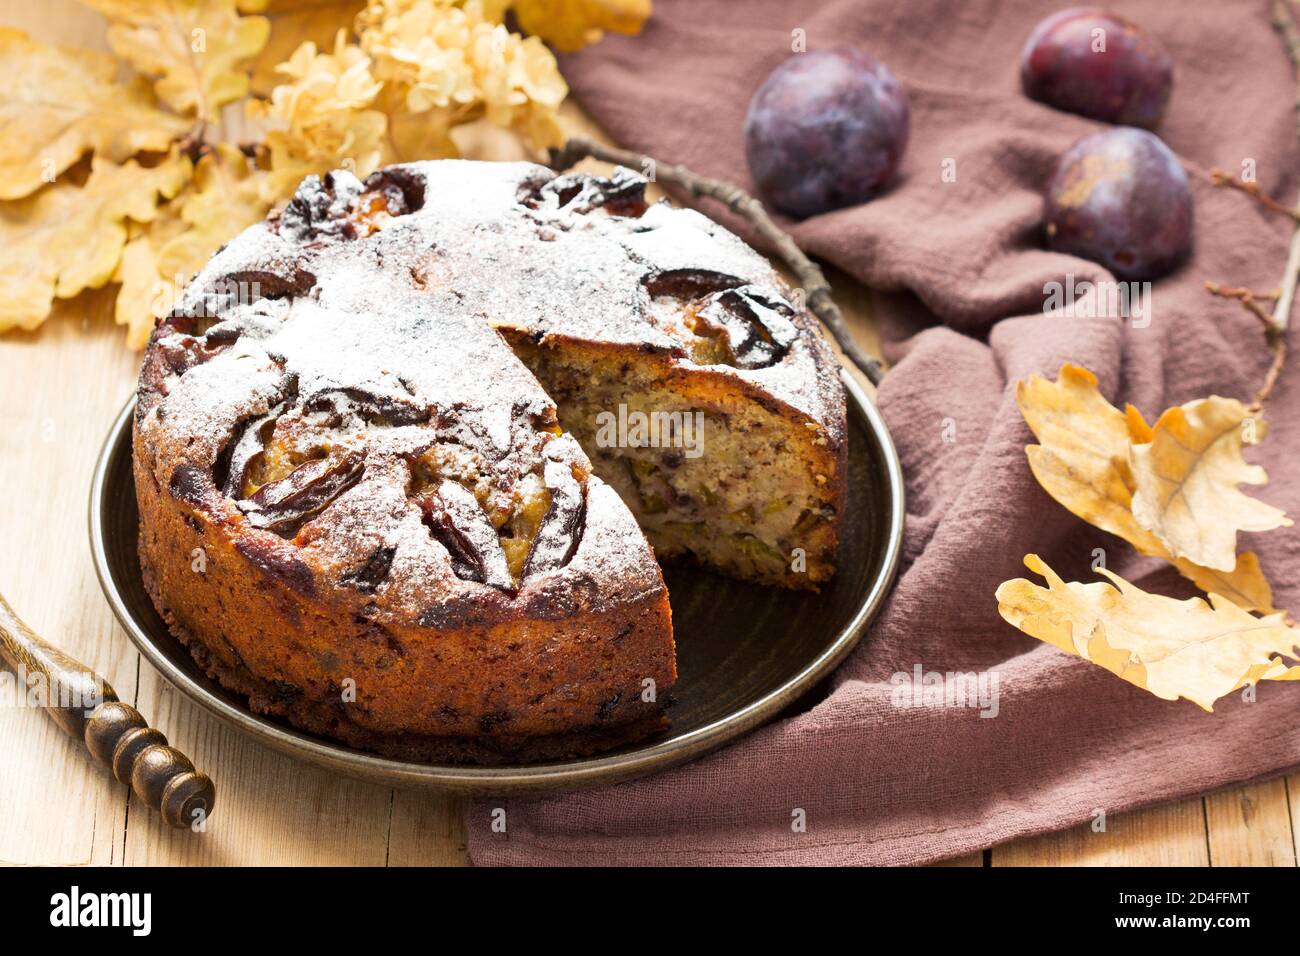 Plum pie with nuts and chocolate on a wooden background. Rustic style. Stock Photo